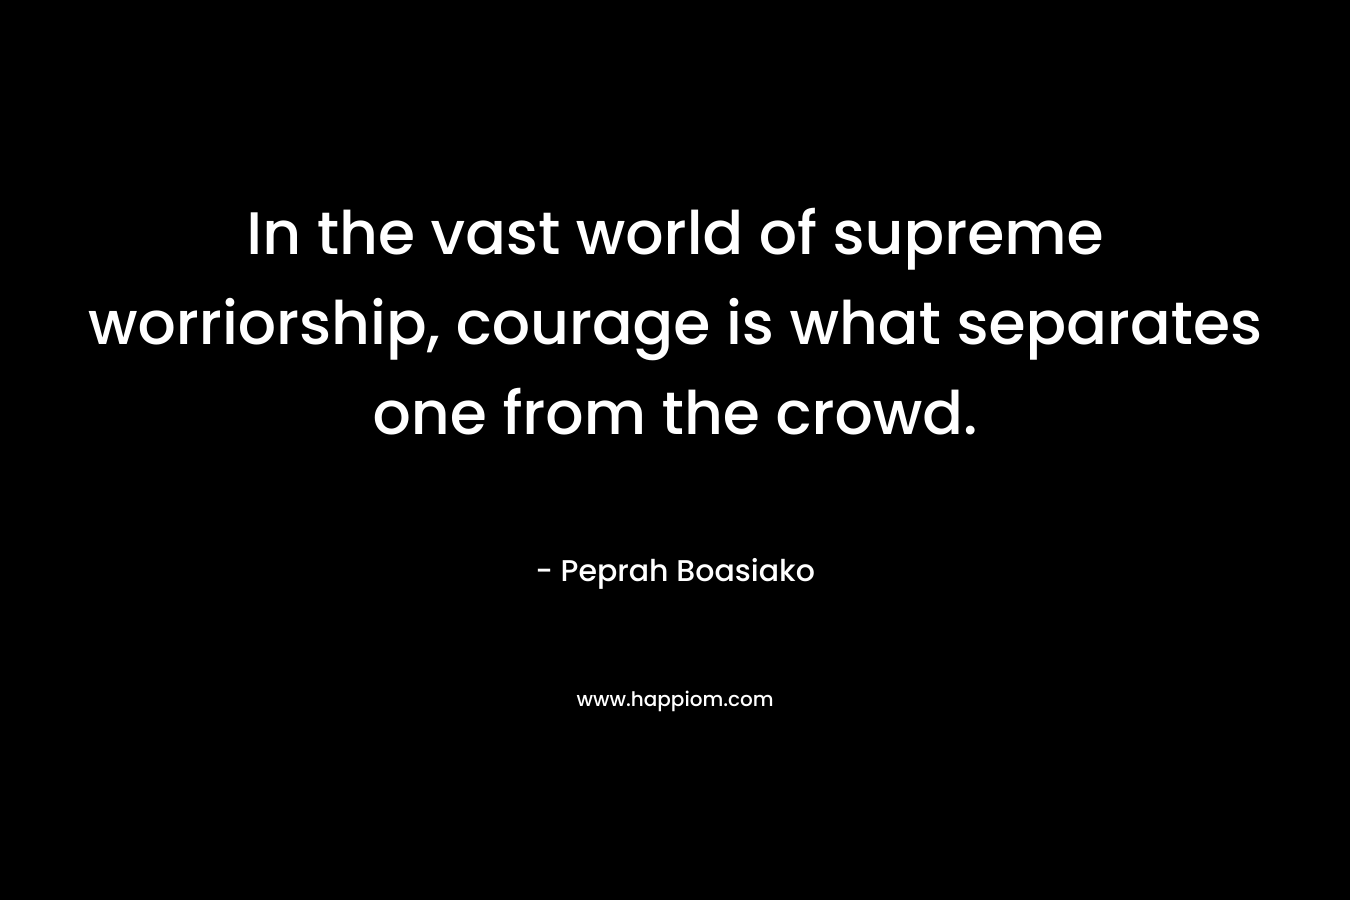 In the vast world of supreme worriorship, courage is what separates one from the crowd.